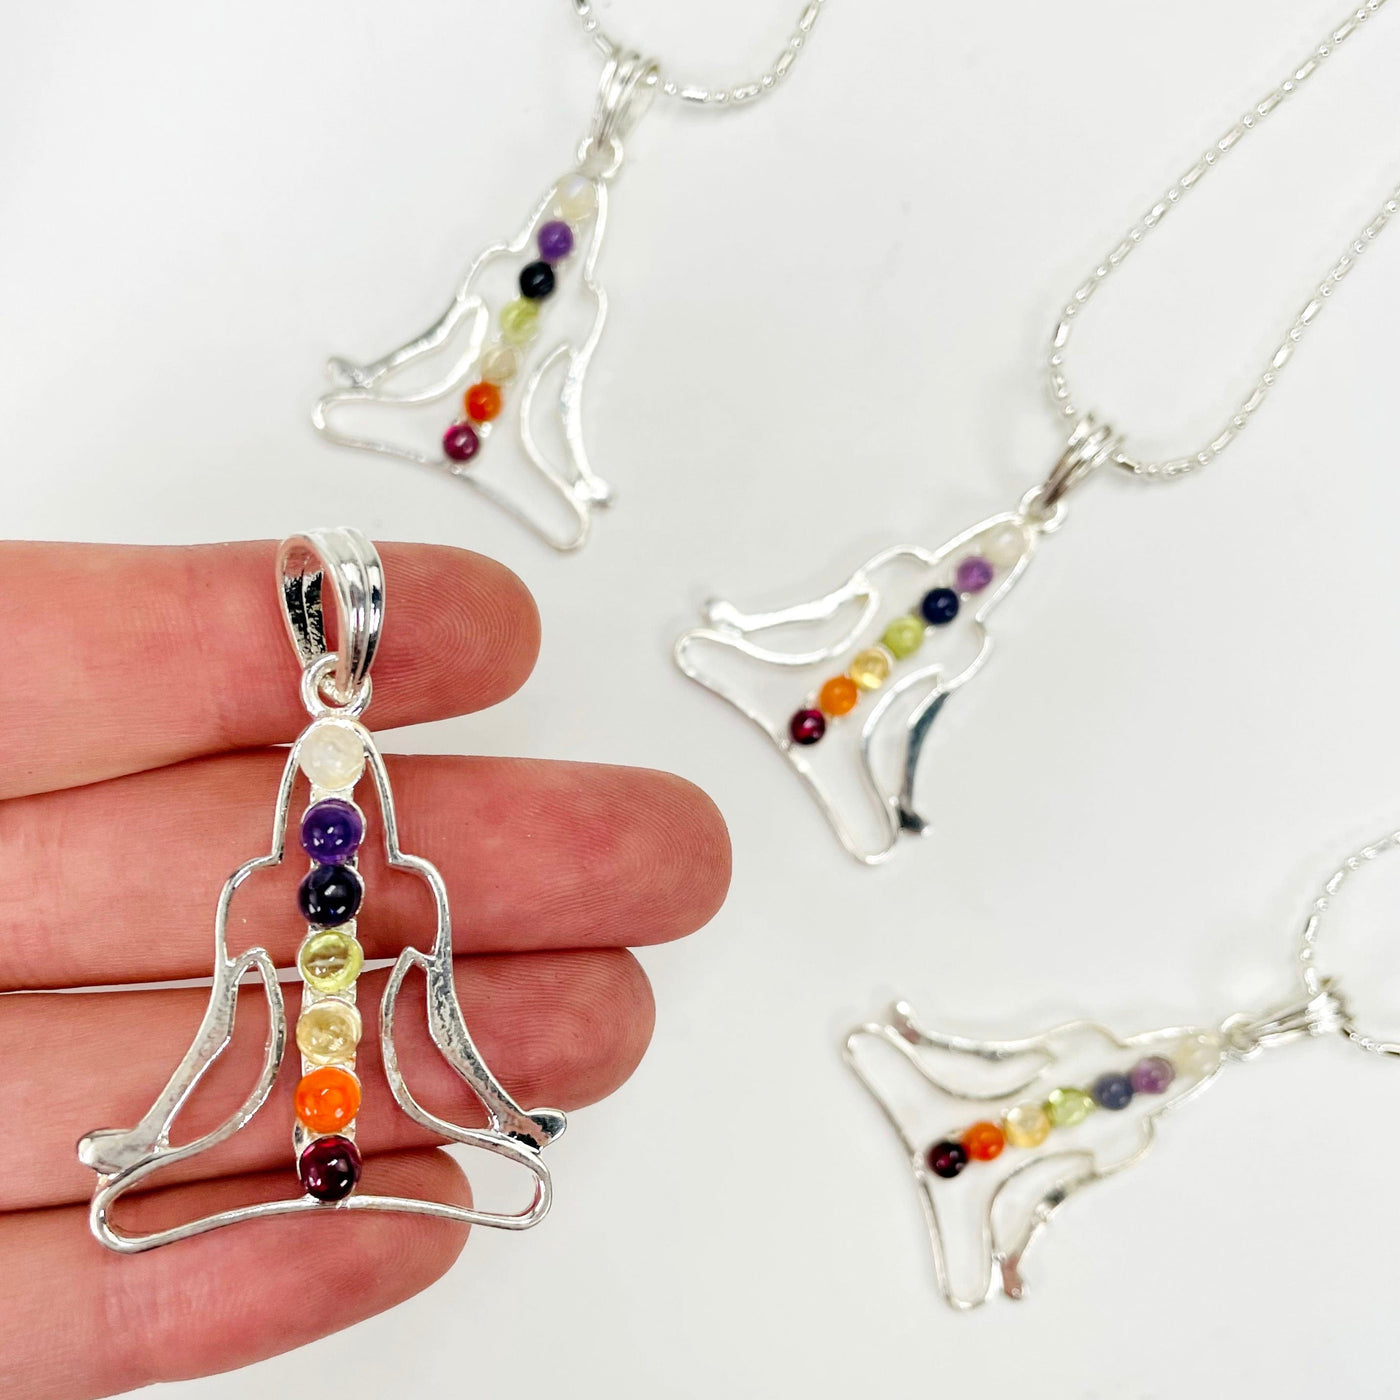 one chakra buddha pendant necklace in hand with three others in the background